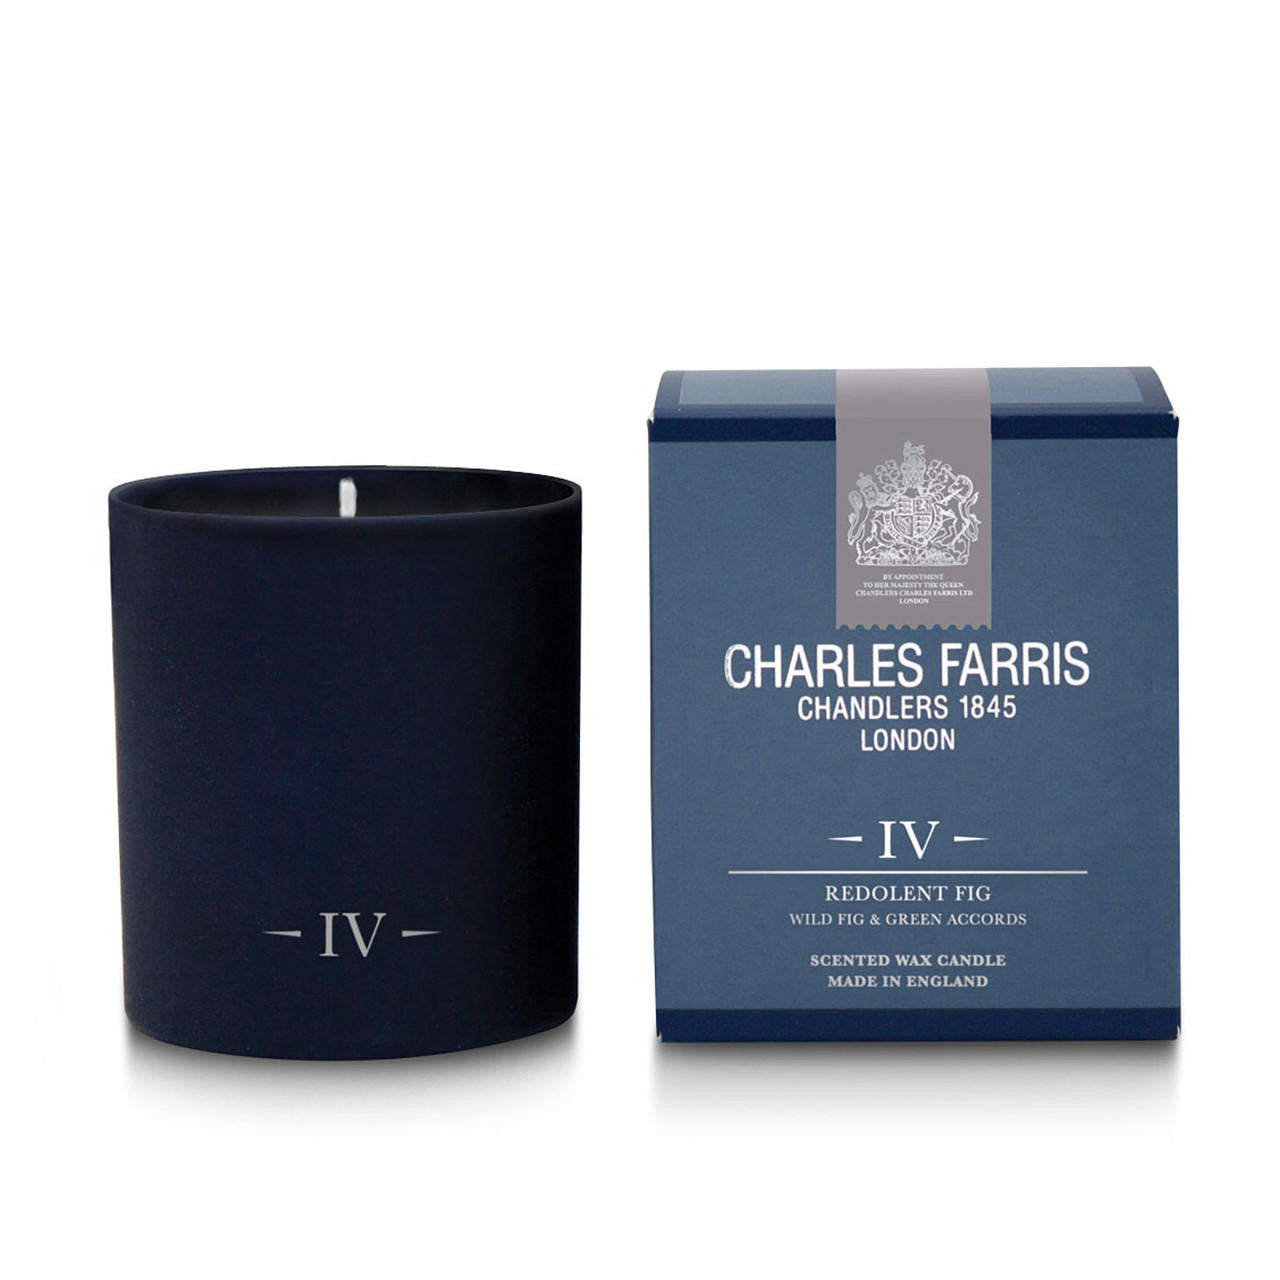  Charles Farris REDOLENT FIG Candle 